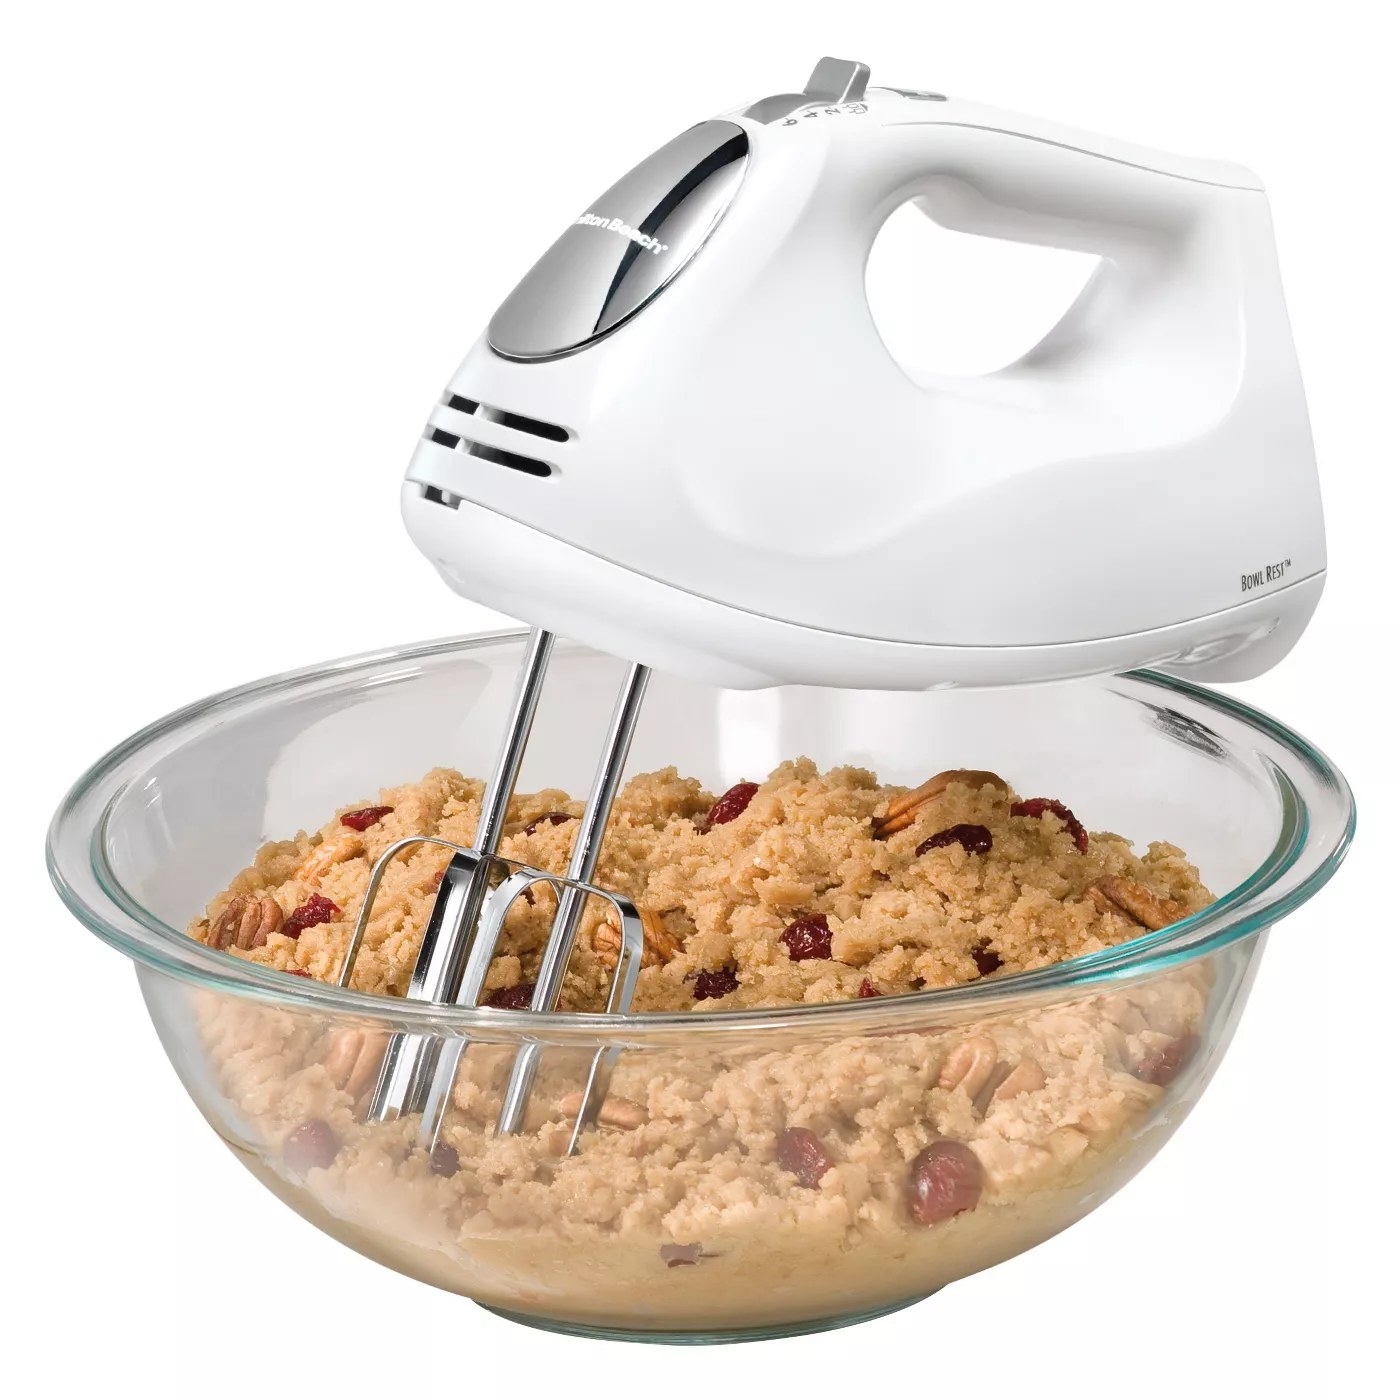 The white and silver hand mixer